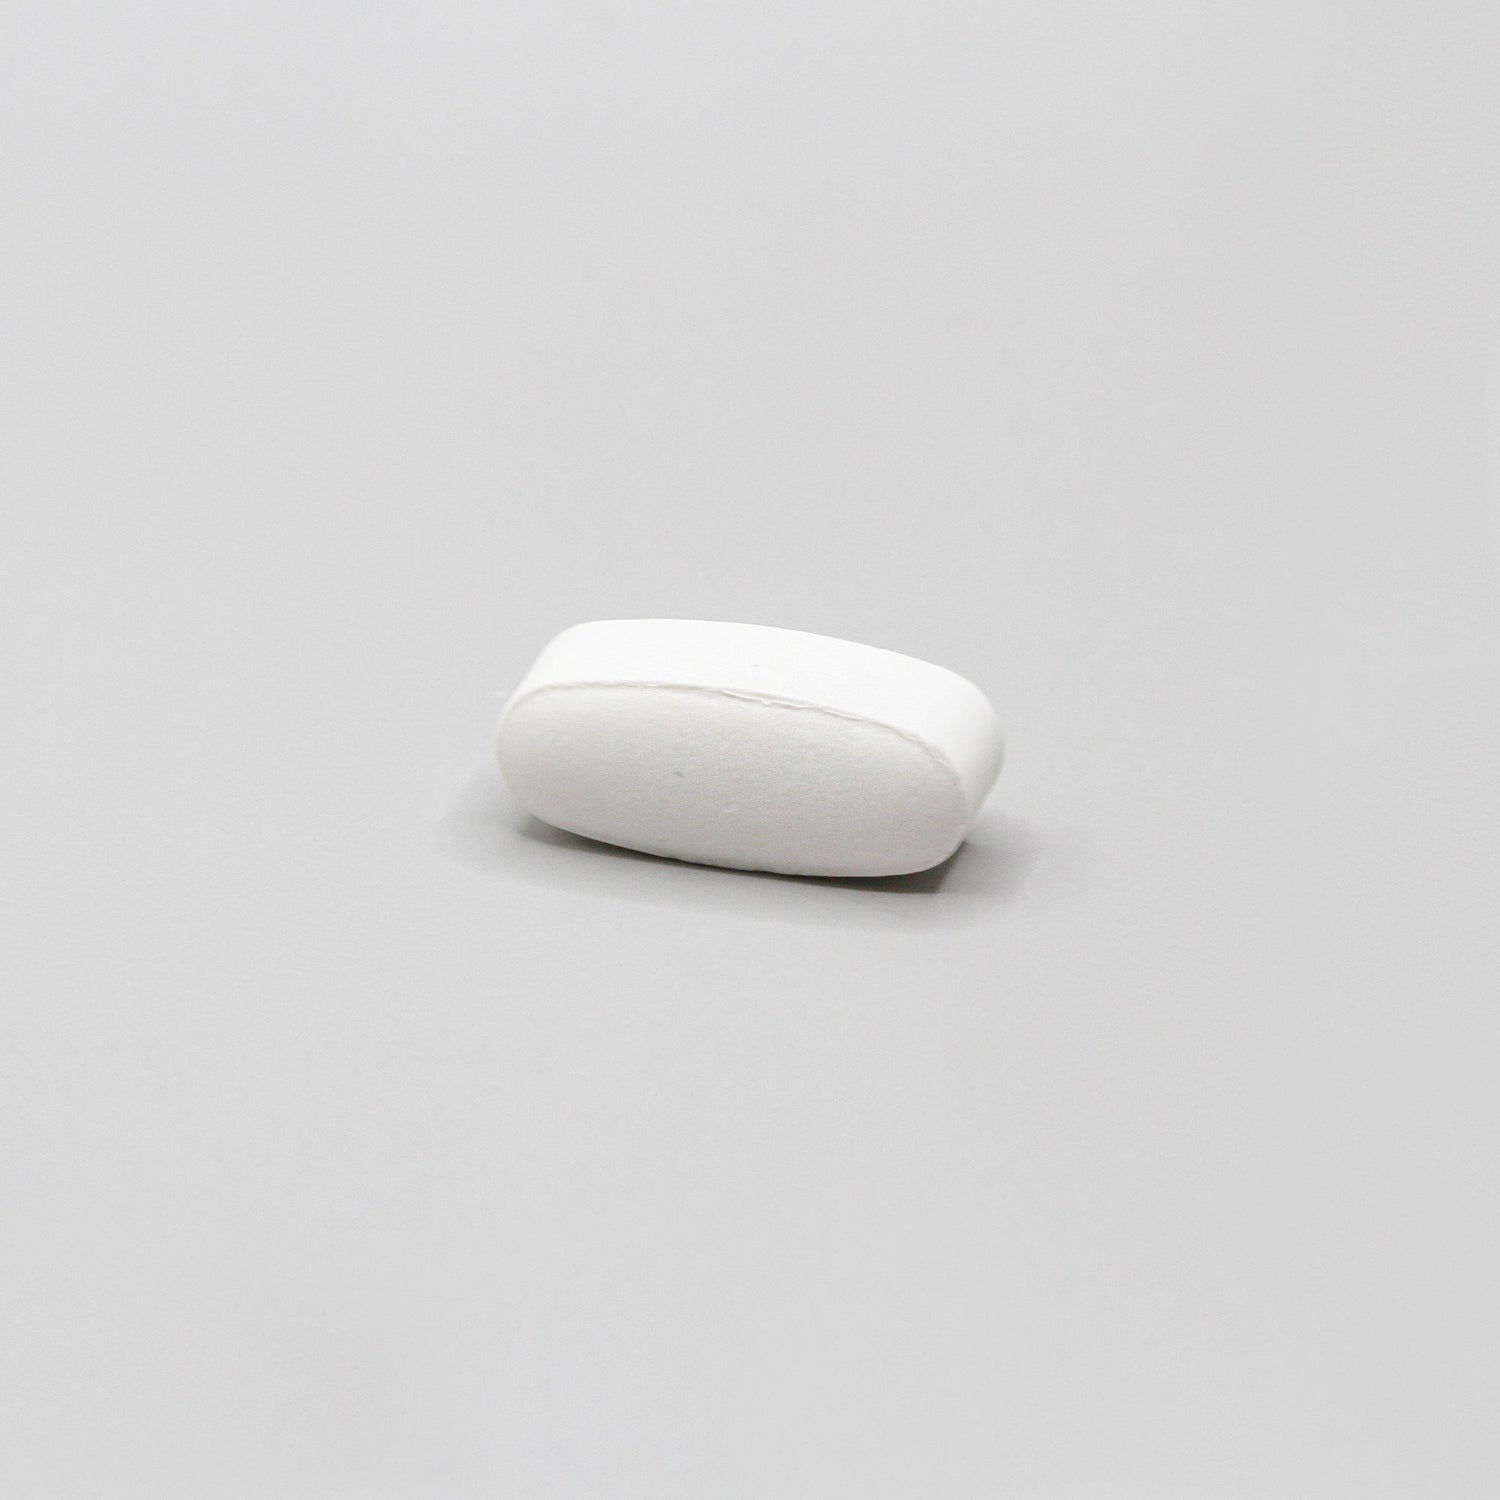 White oval pill